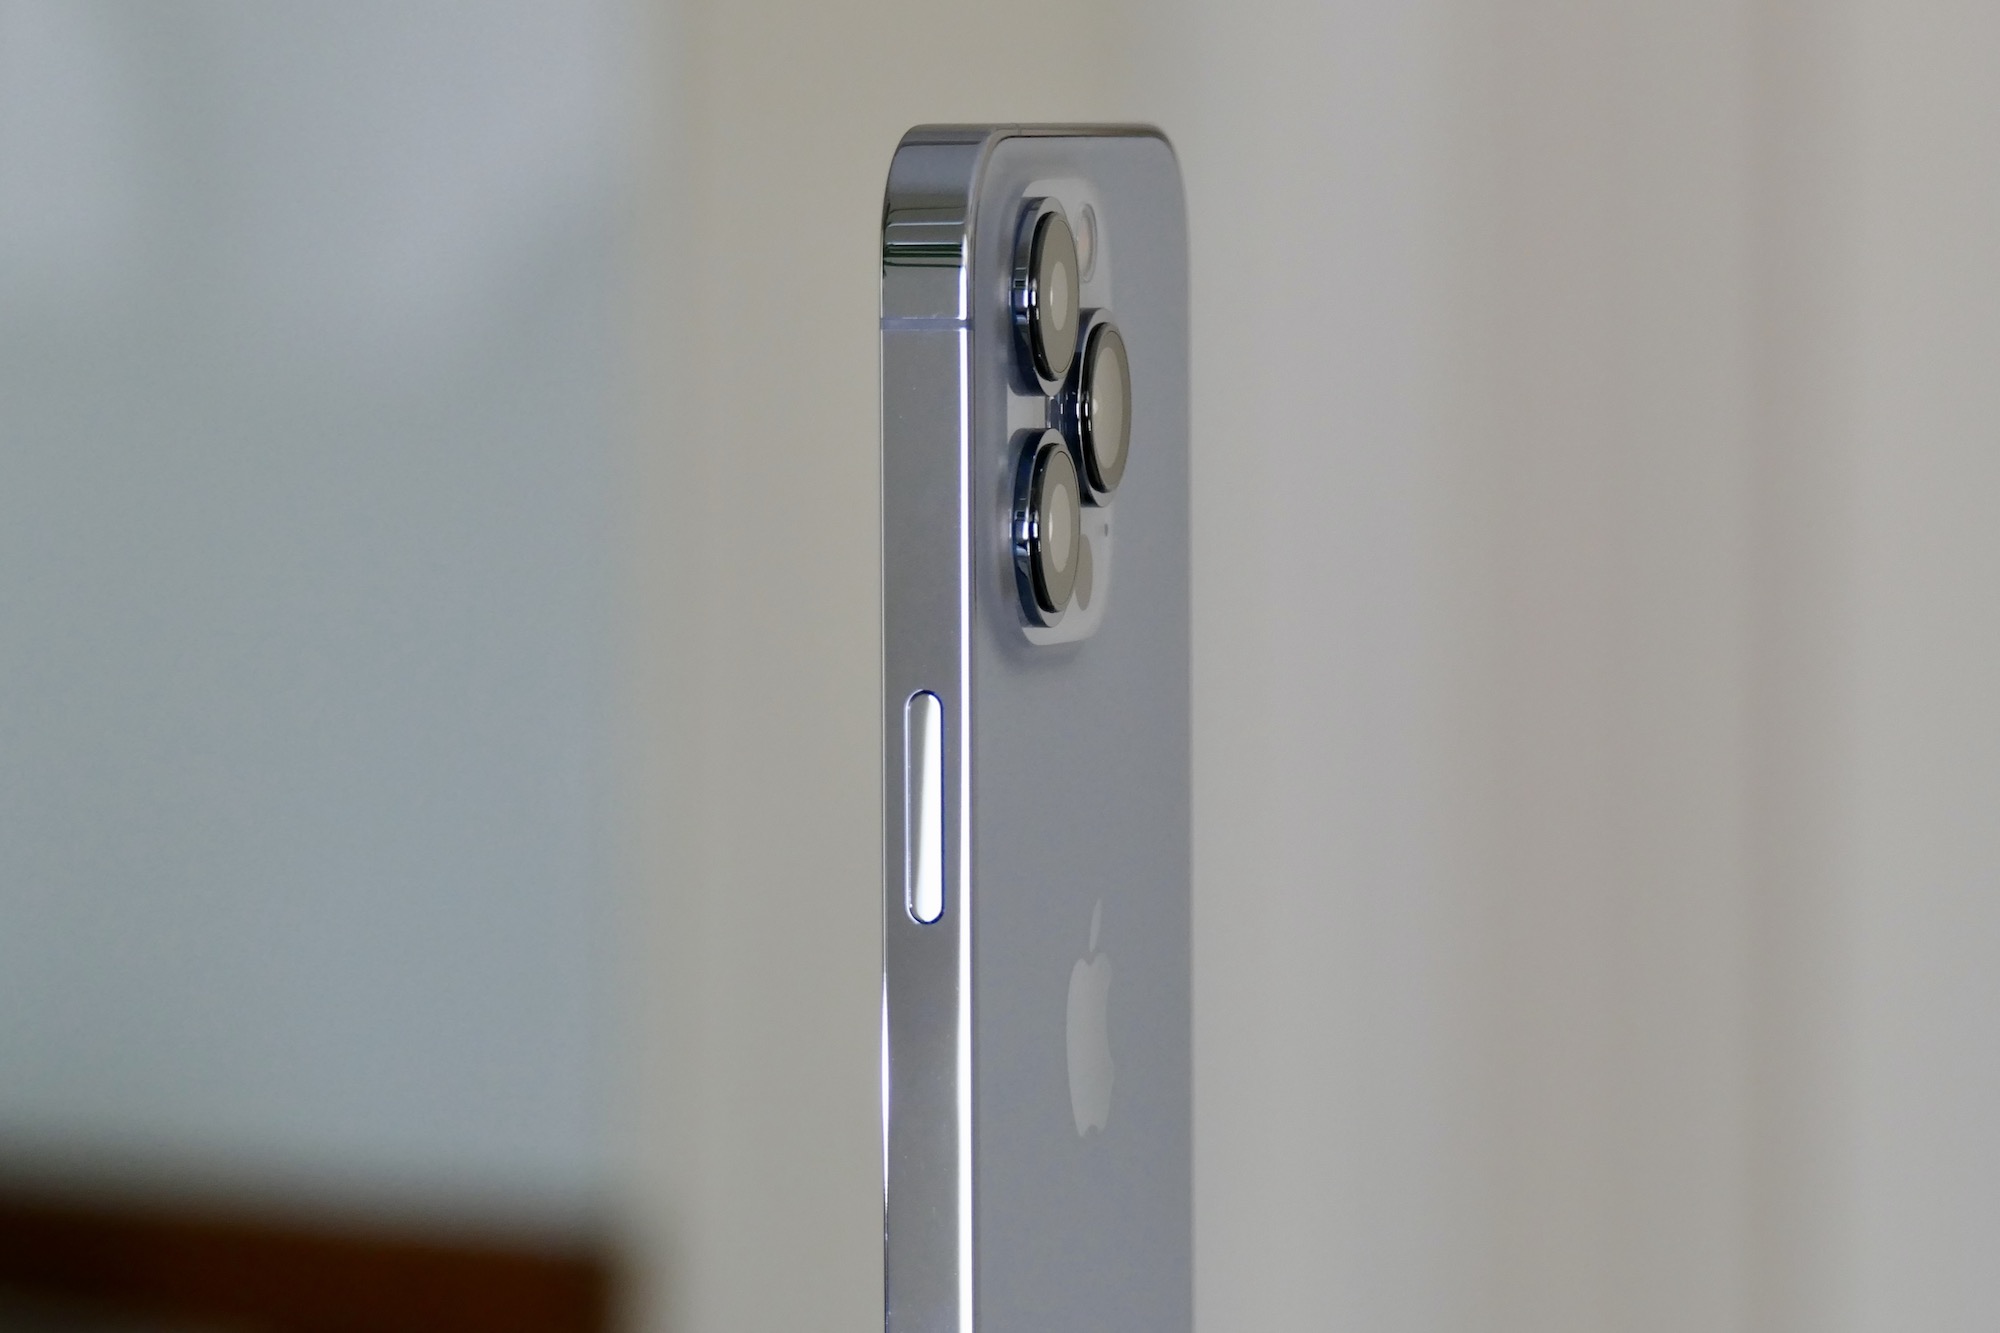 The iPhone 13 Pro's camera module seen from the side.